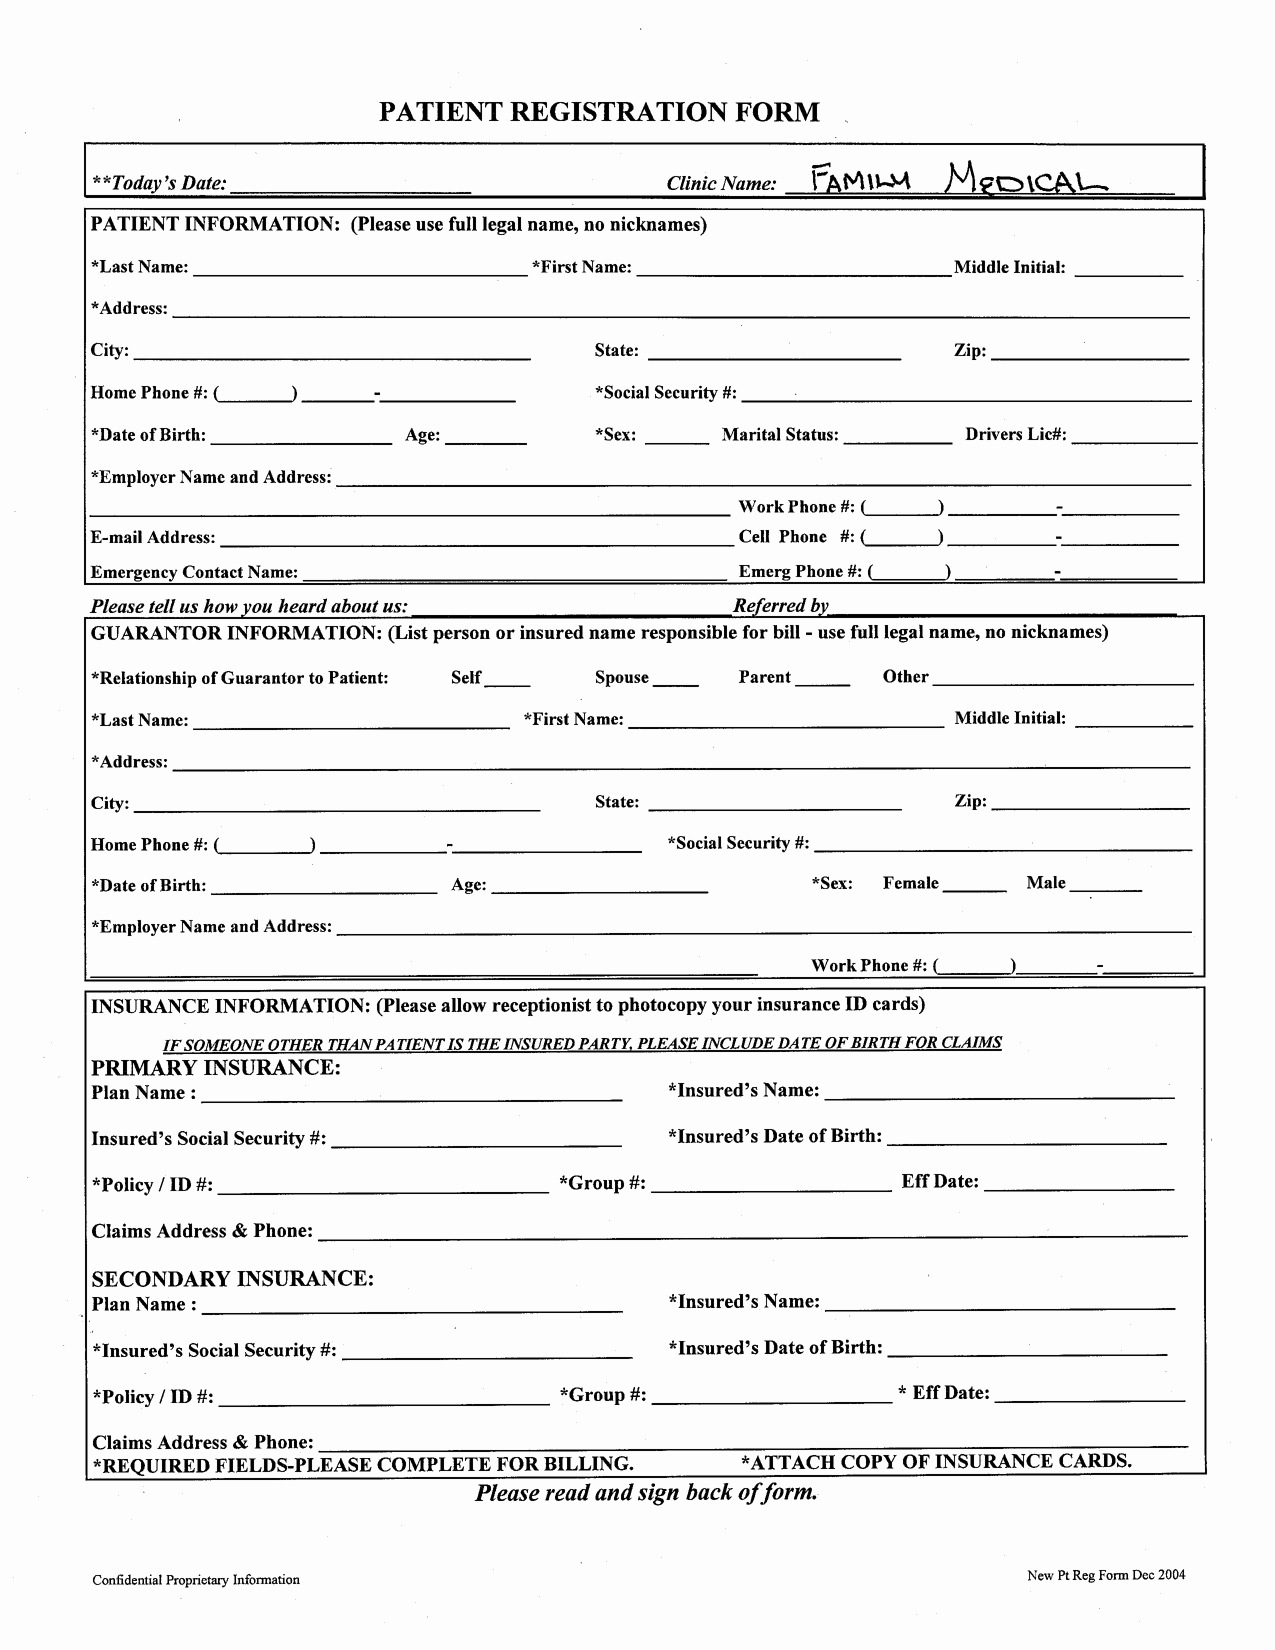 Patient Health History form Template Inspirational Best S Of Printable Patient Registration forms